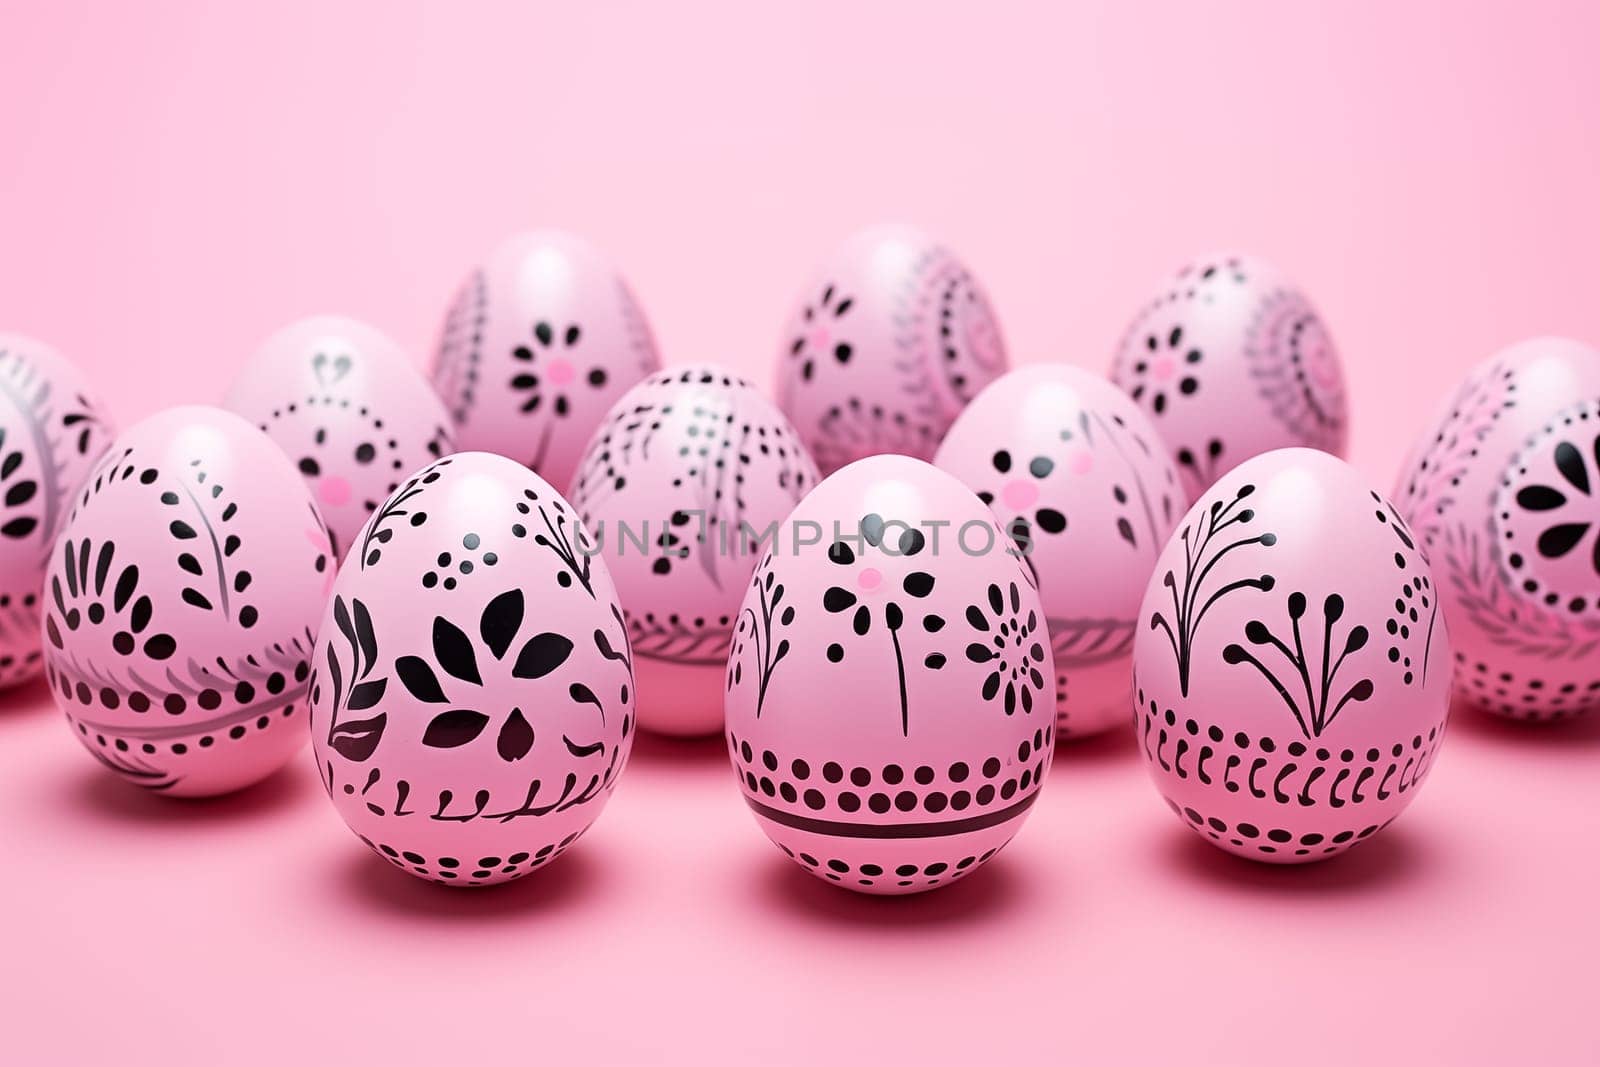 Handmade decorated Easter eggs on pink background by Nadtochiy